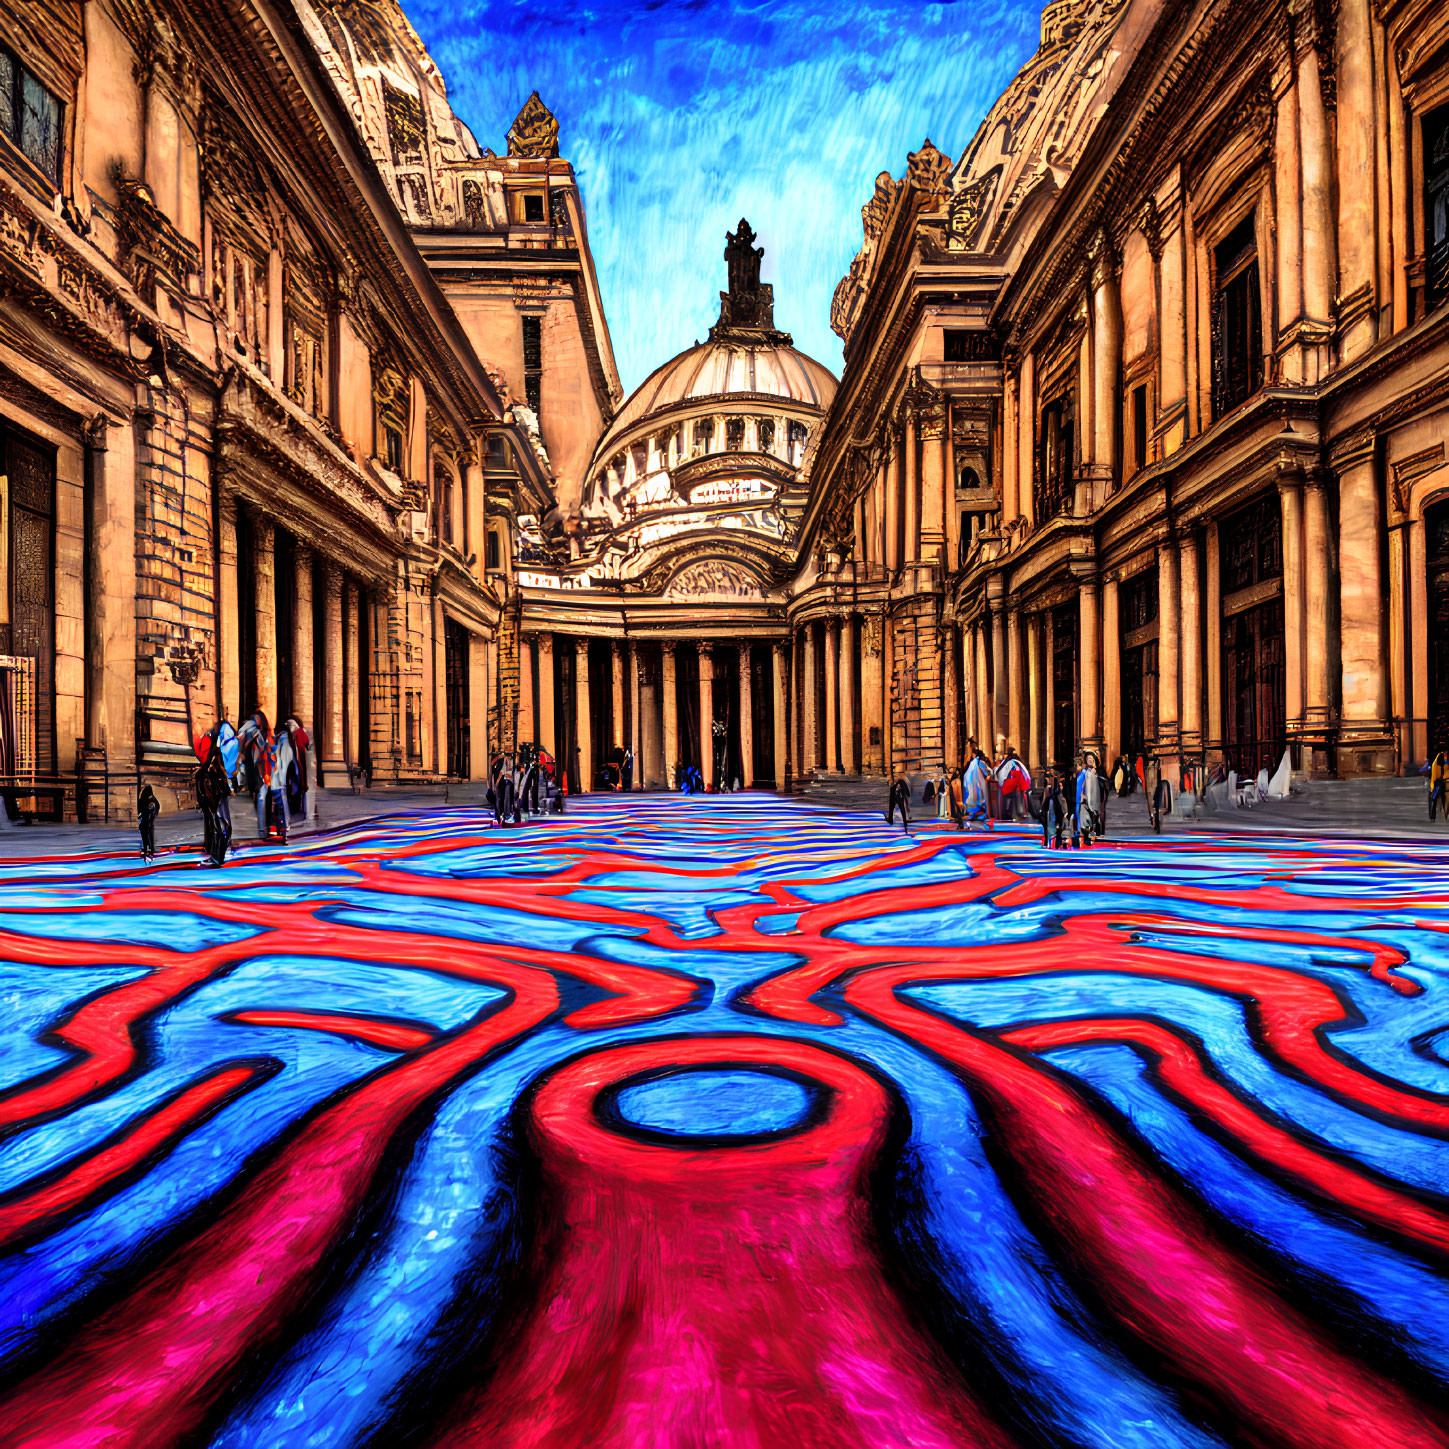 Vibrant abstract pattern leading to neoclassical building under blue sky